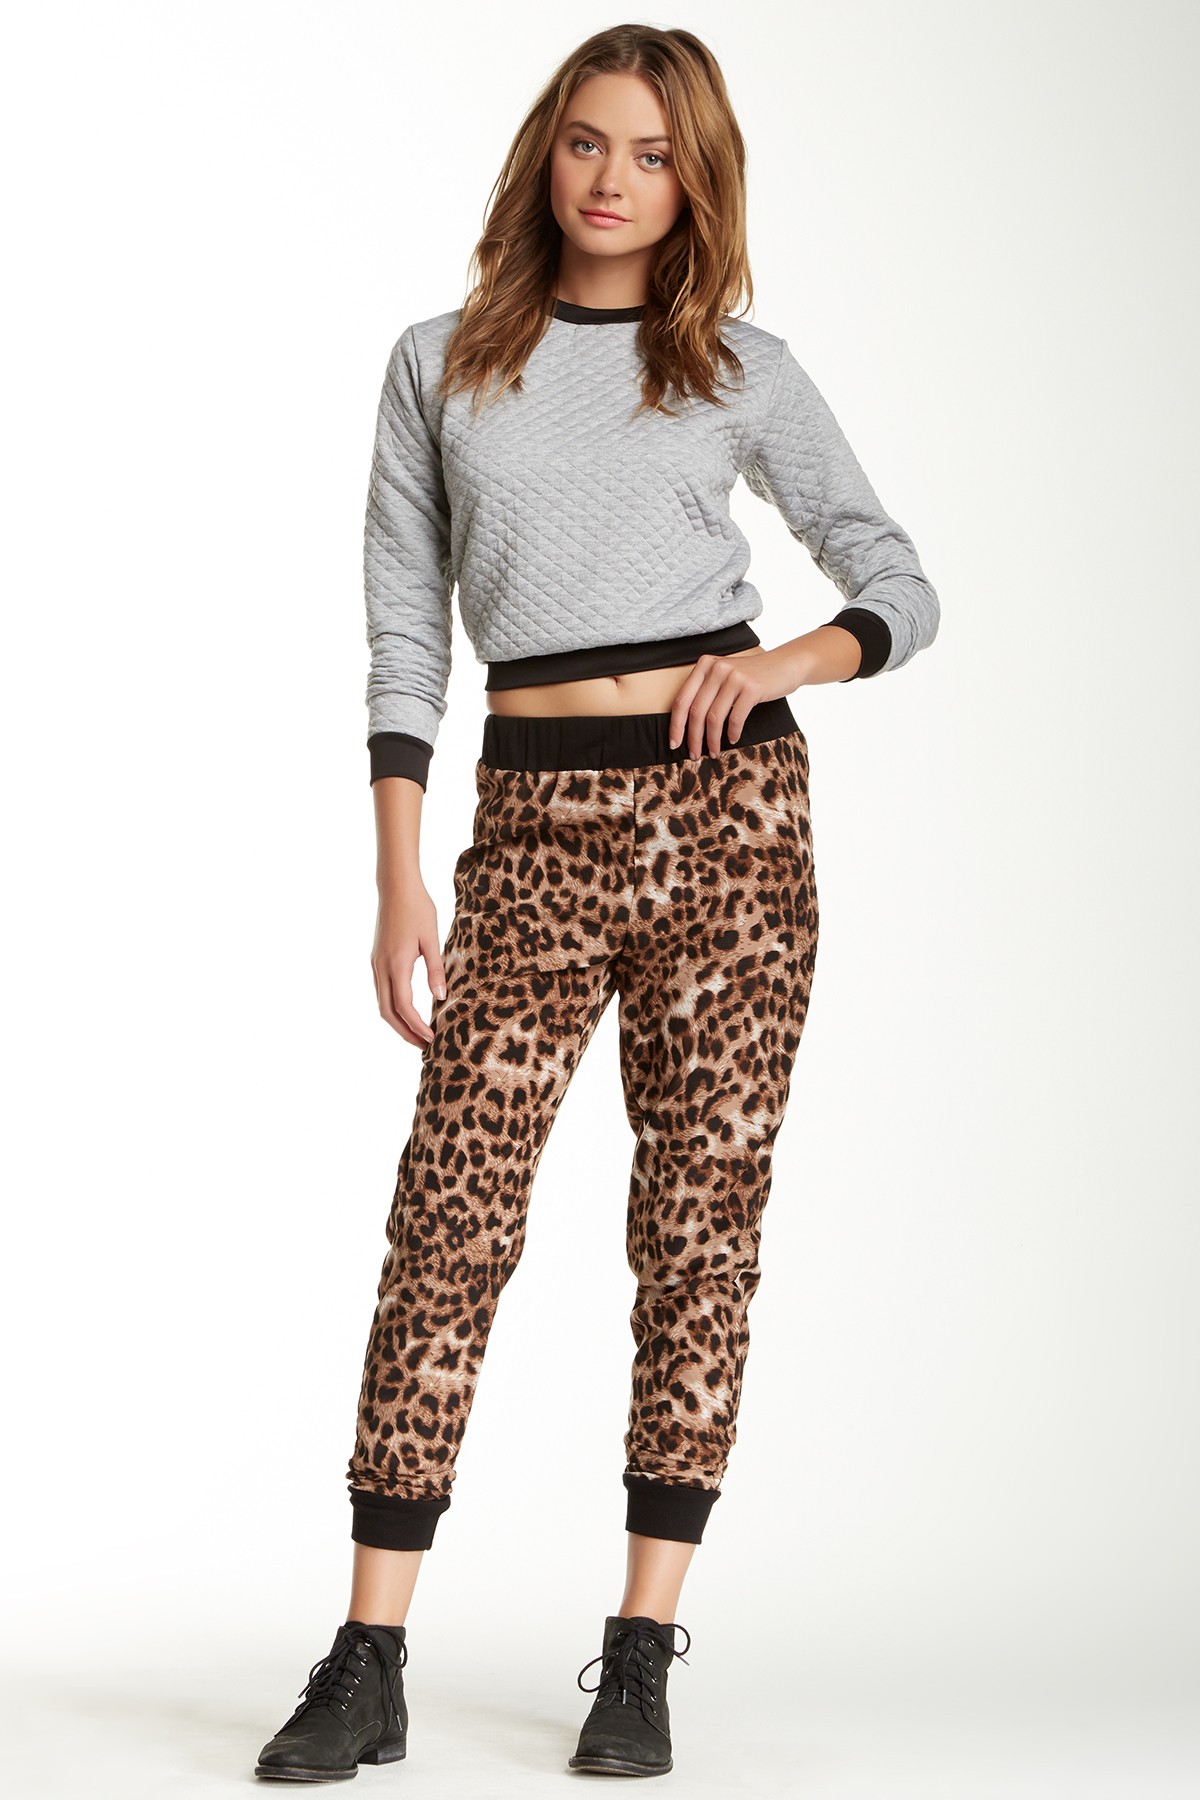 Blvd In Style Animal Print Jogger Pant